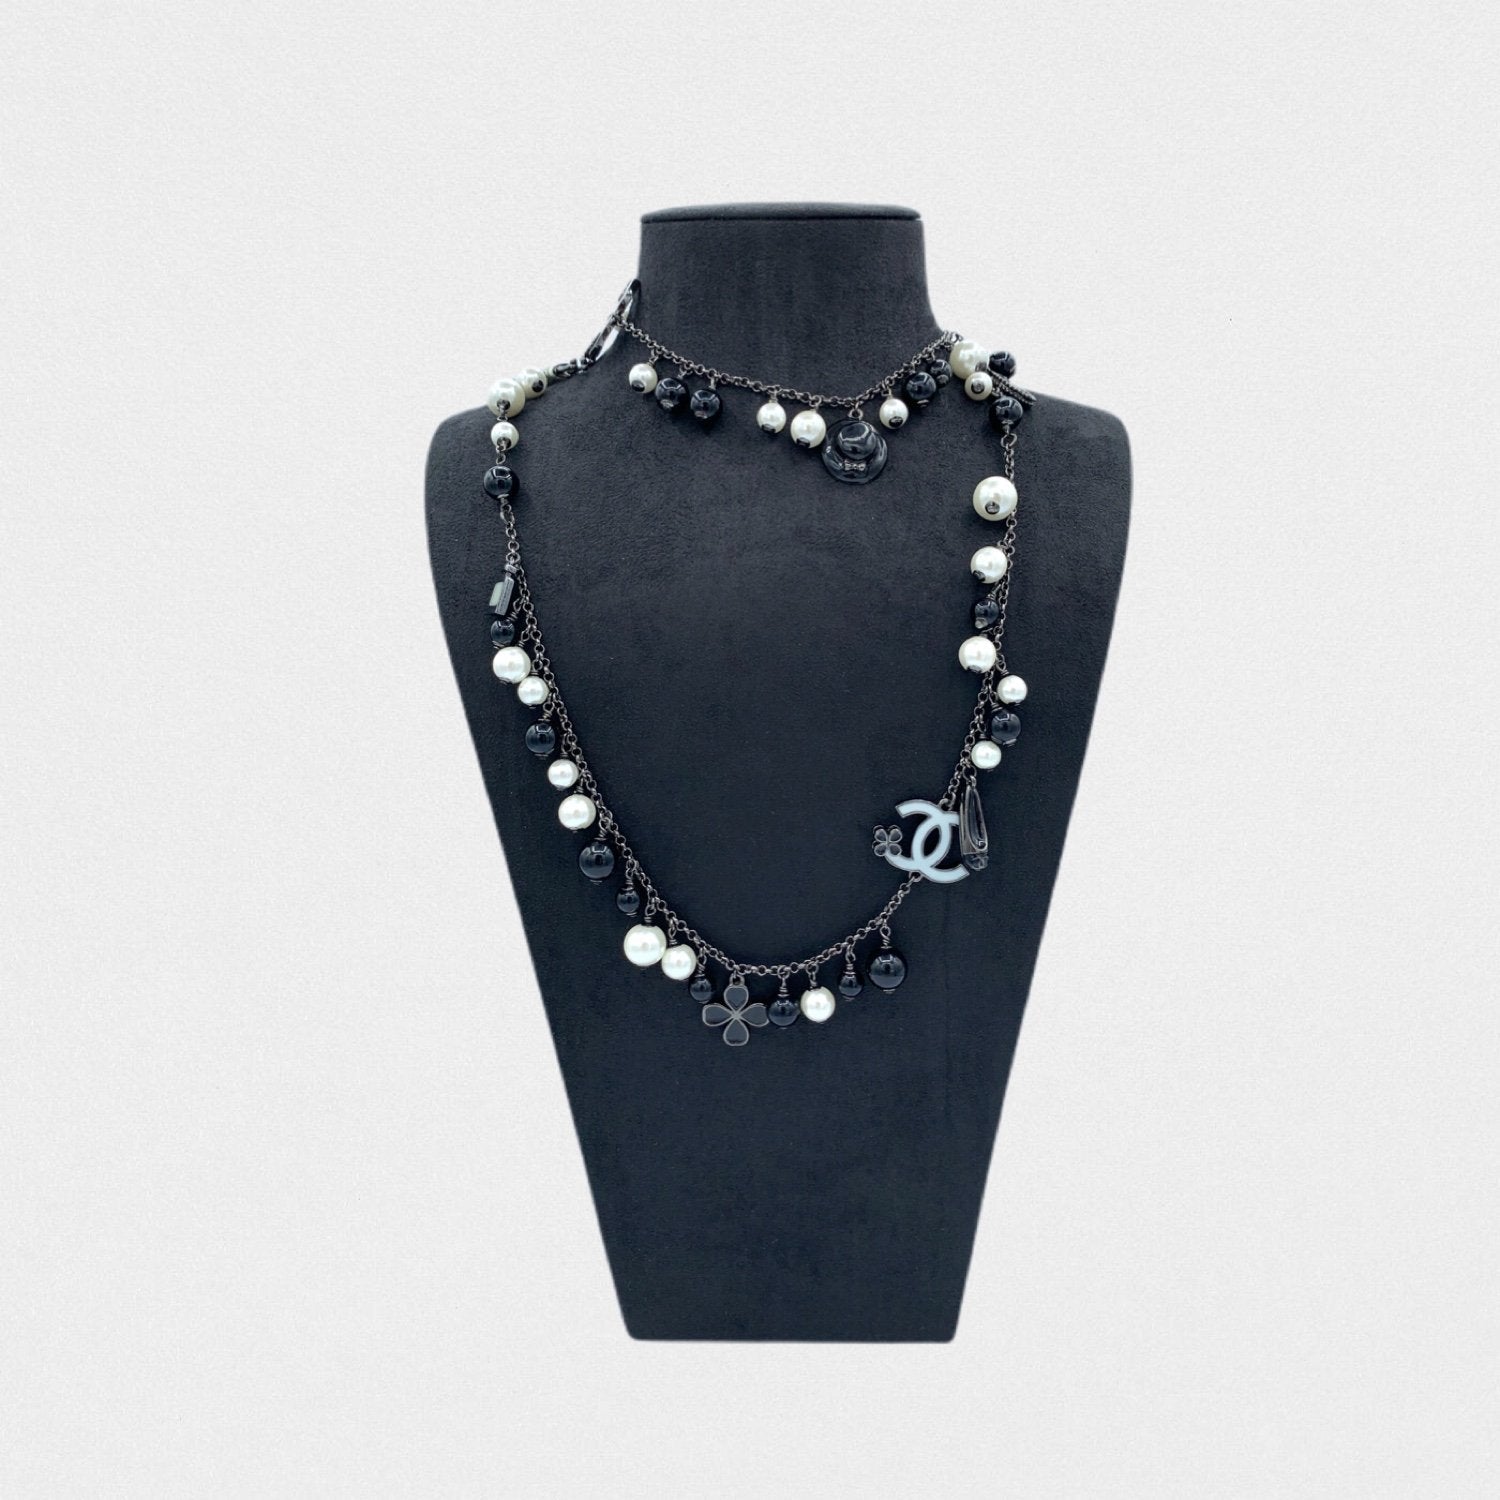 Lysis vintage Chanel CC & pearls long necklace - 2010s